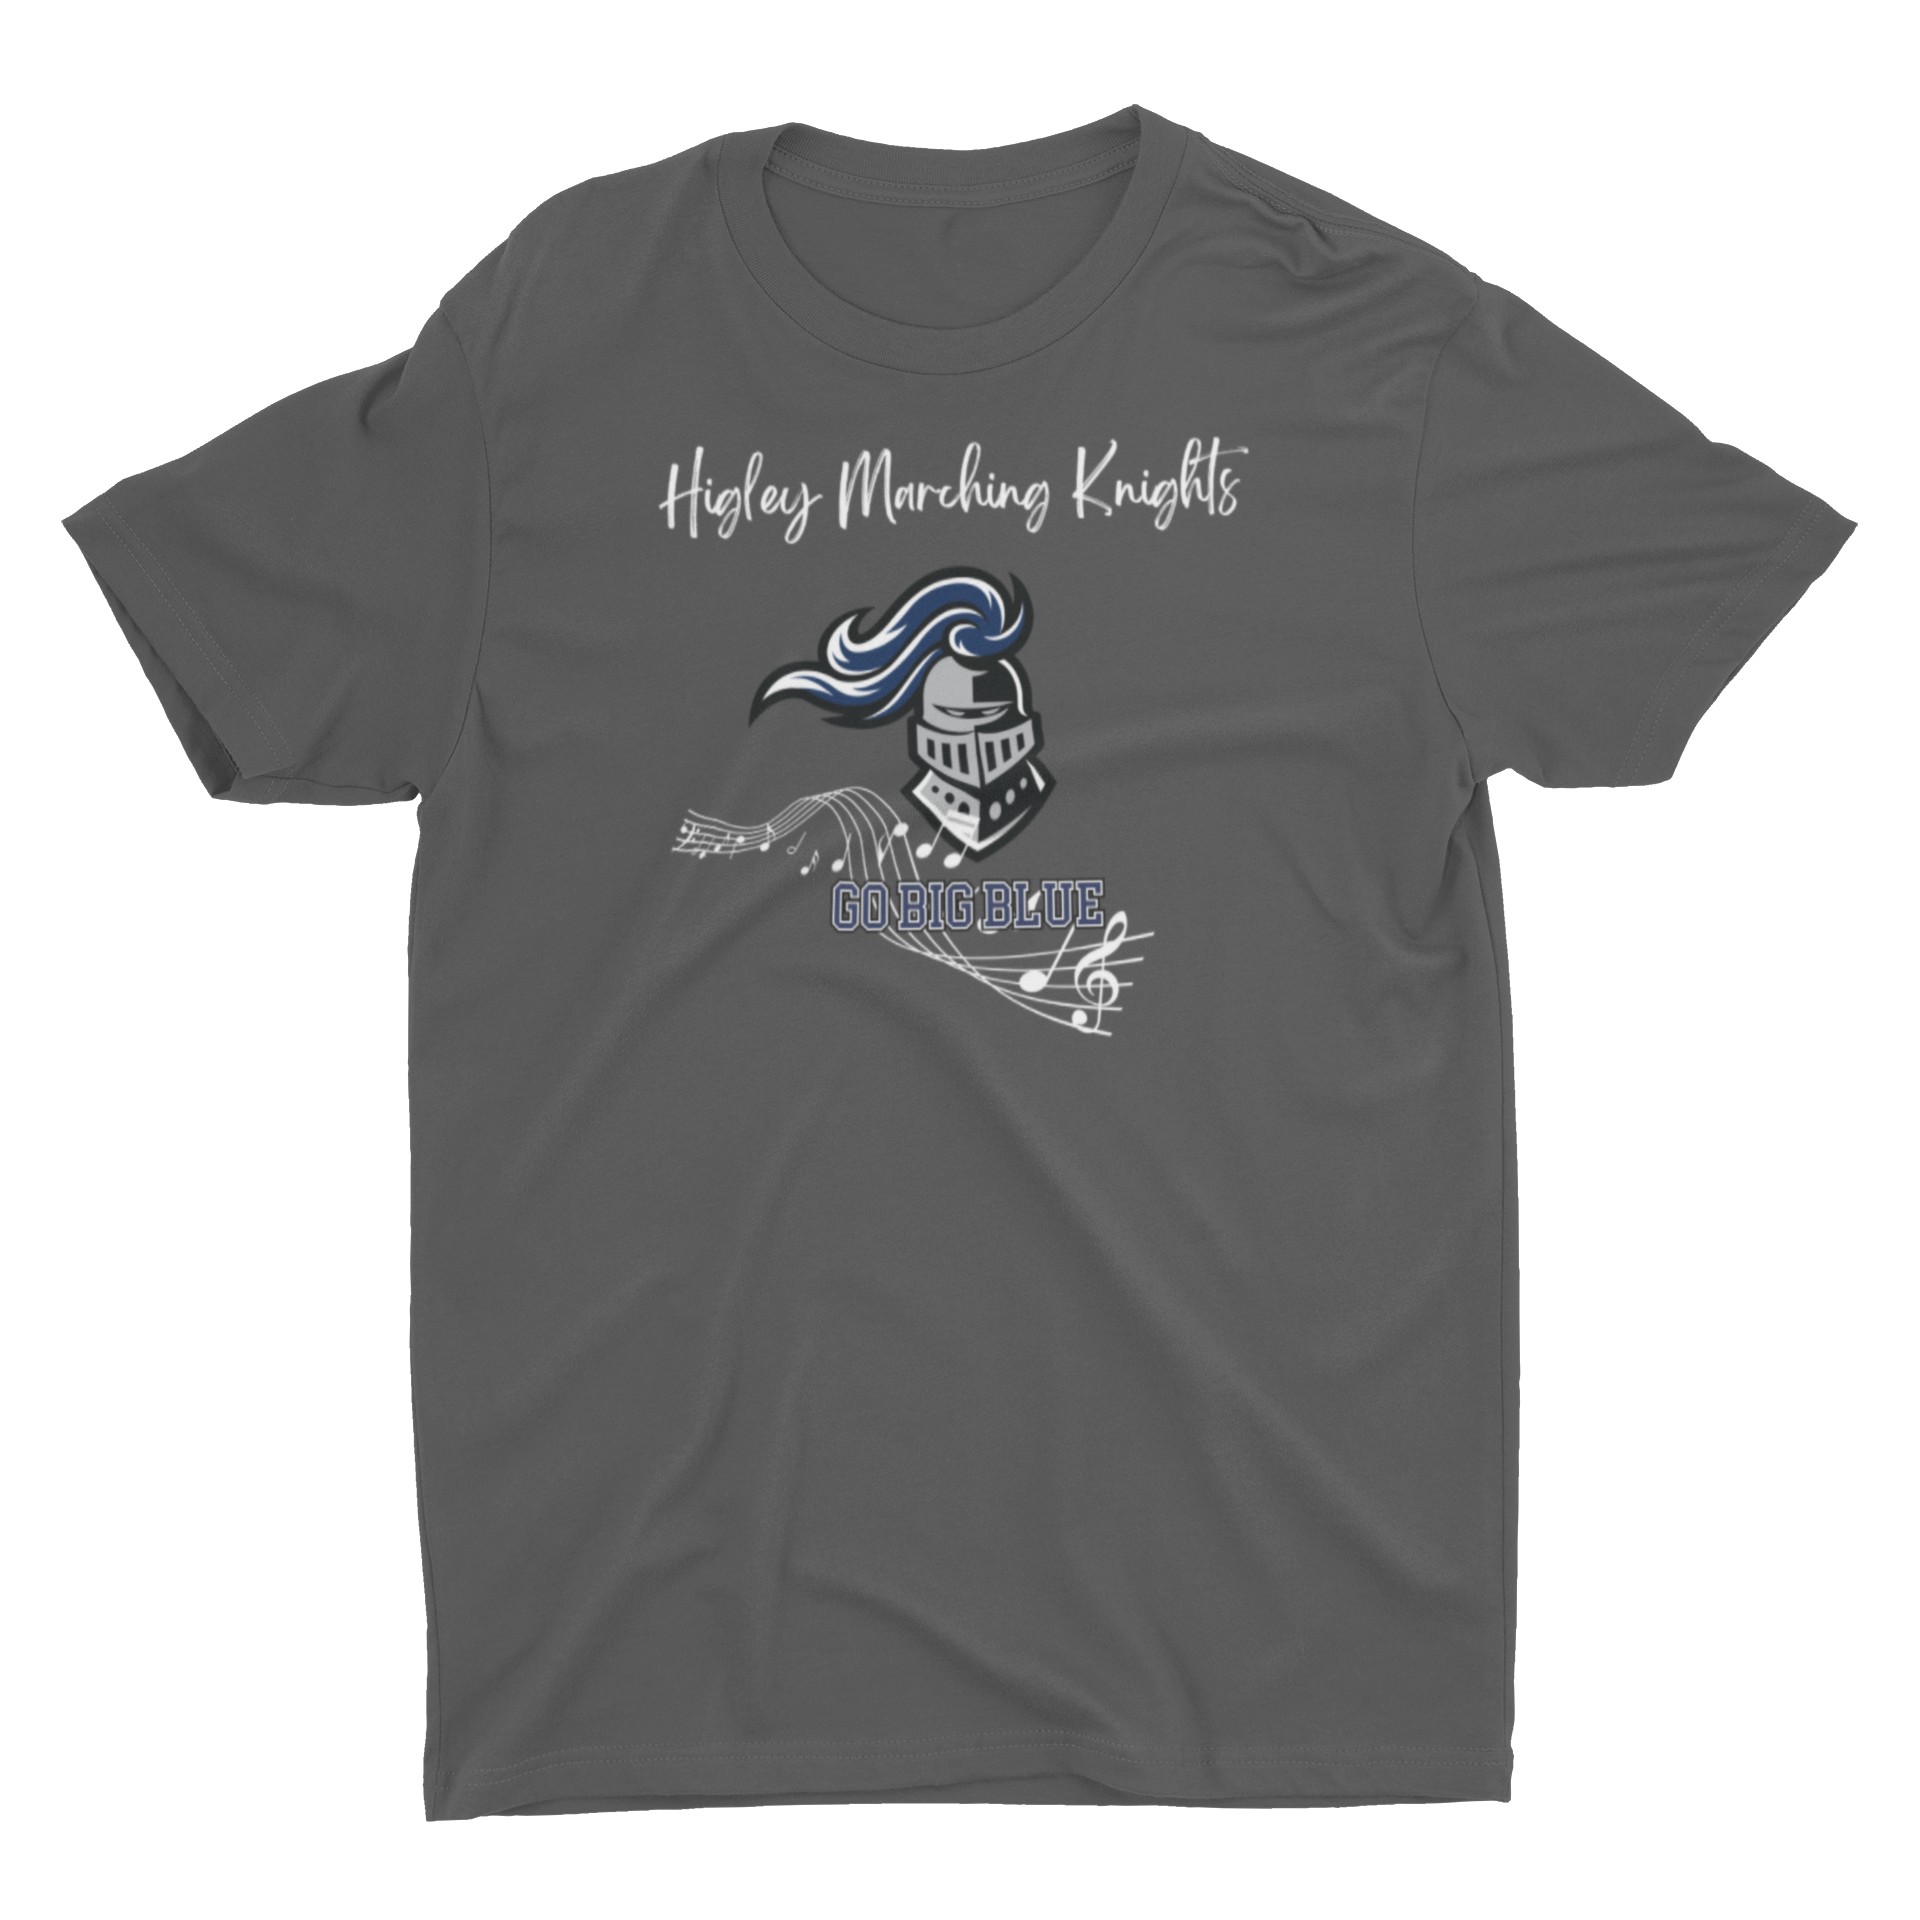 Higley Marching Knights T-Shirt - Single Graphic